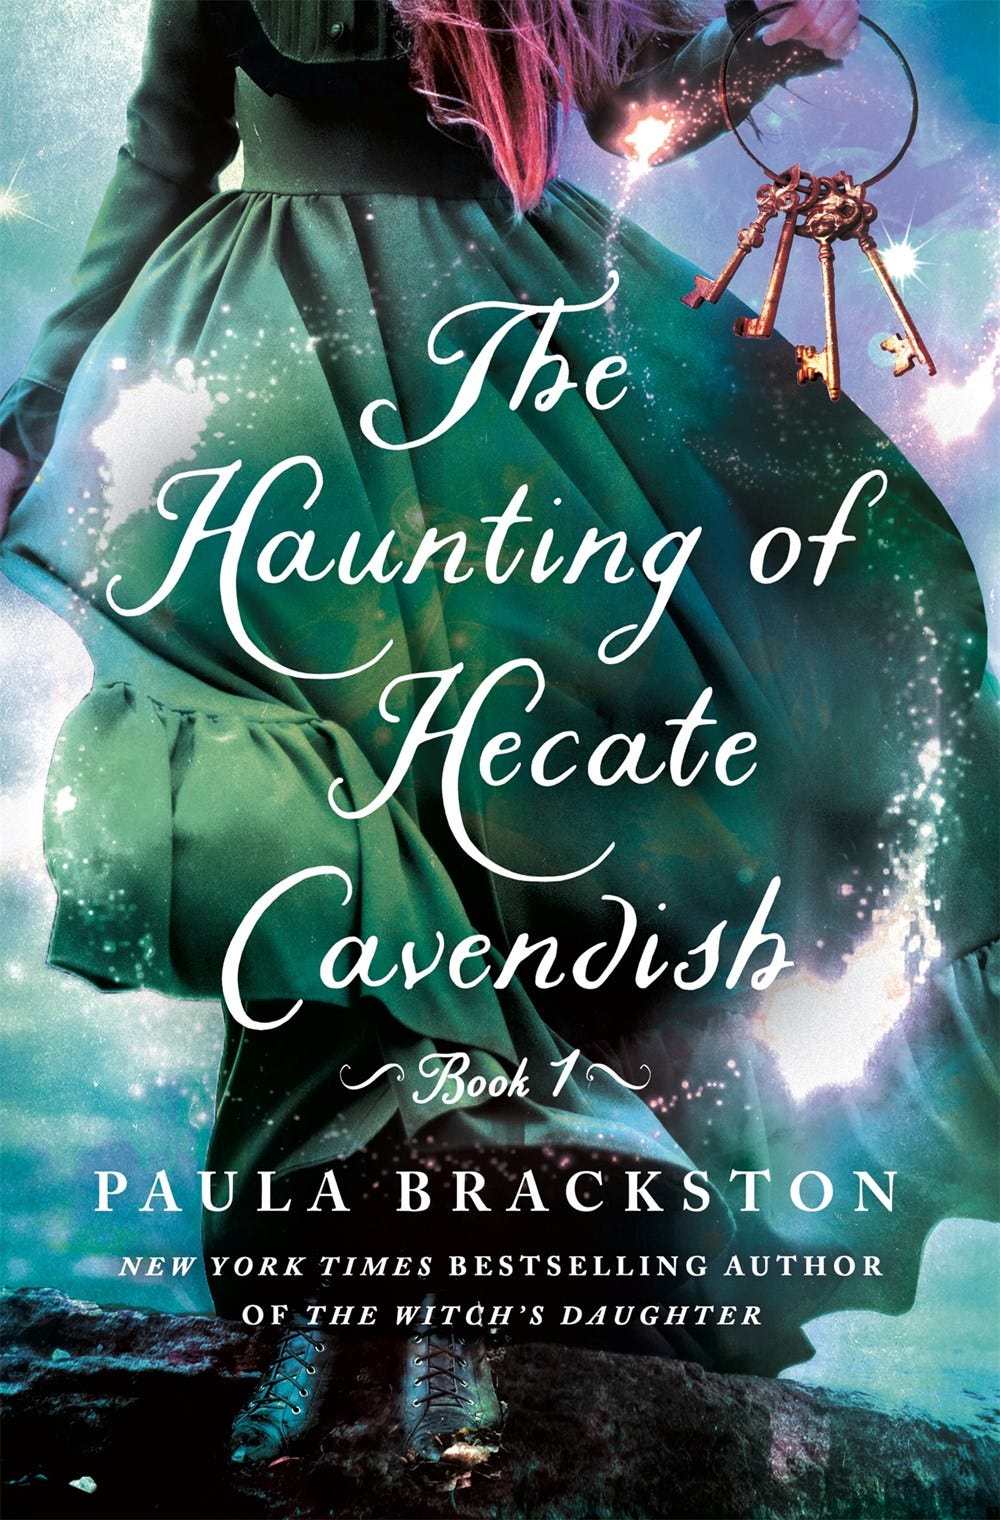 “The Haunting of Hecate Cavendish” Book Cover